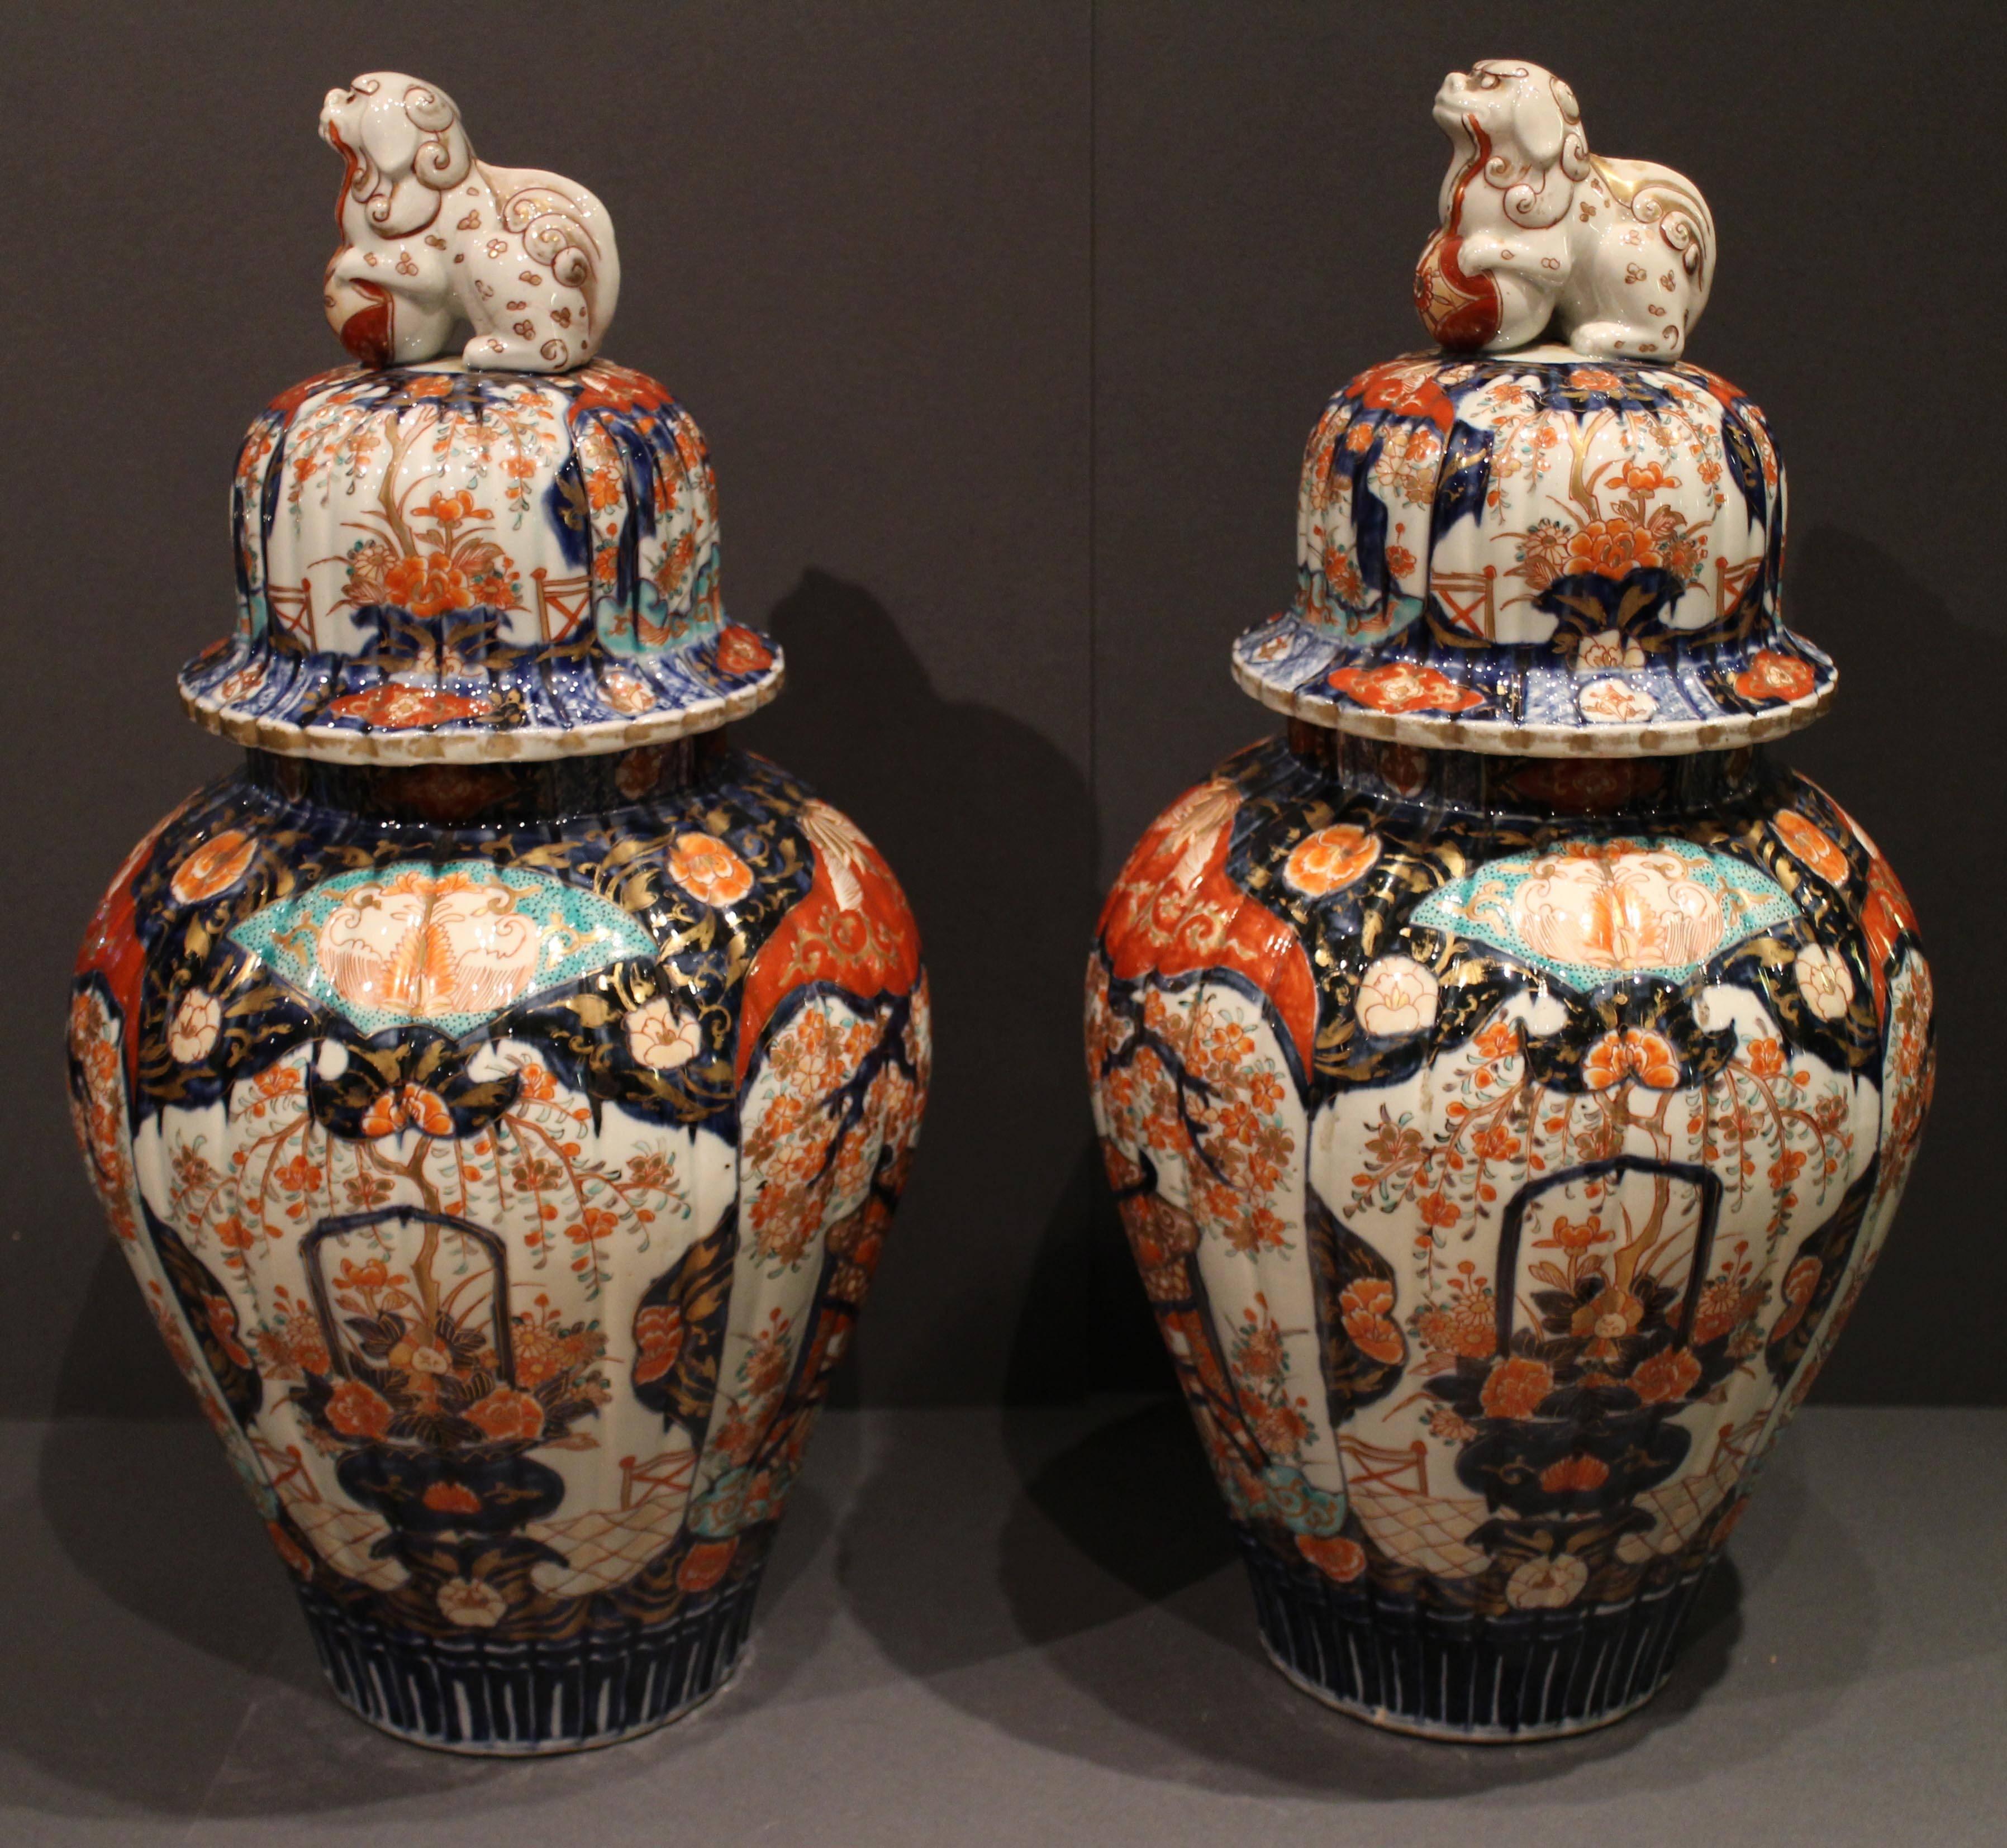 Porcelain Pair of Antique Japanese Imari Vases and Covers Decorated in Blue and Orange